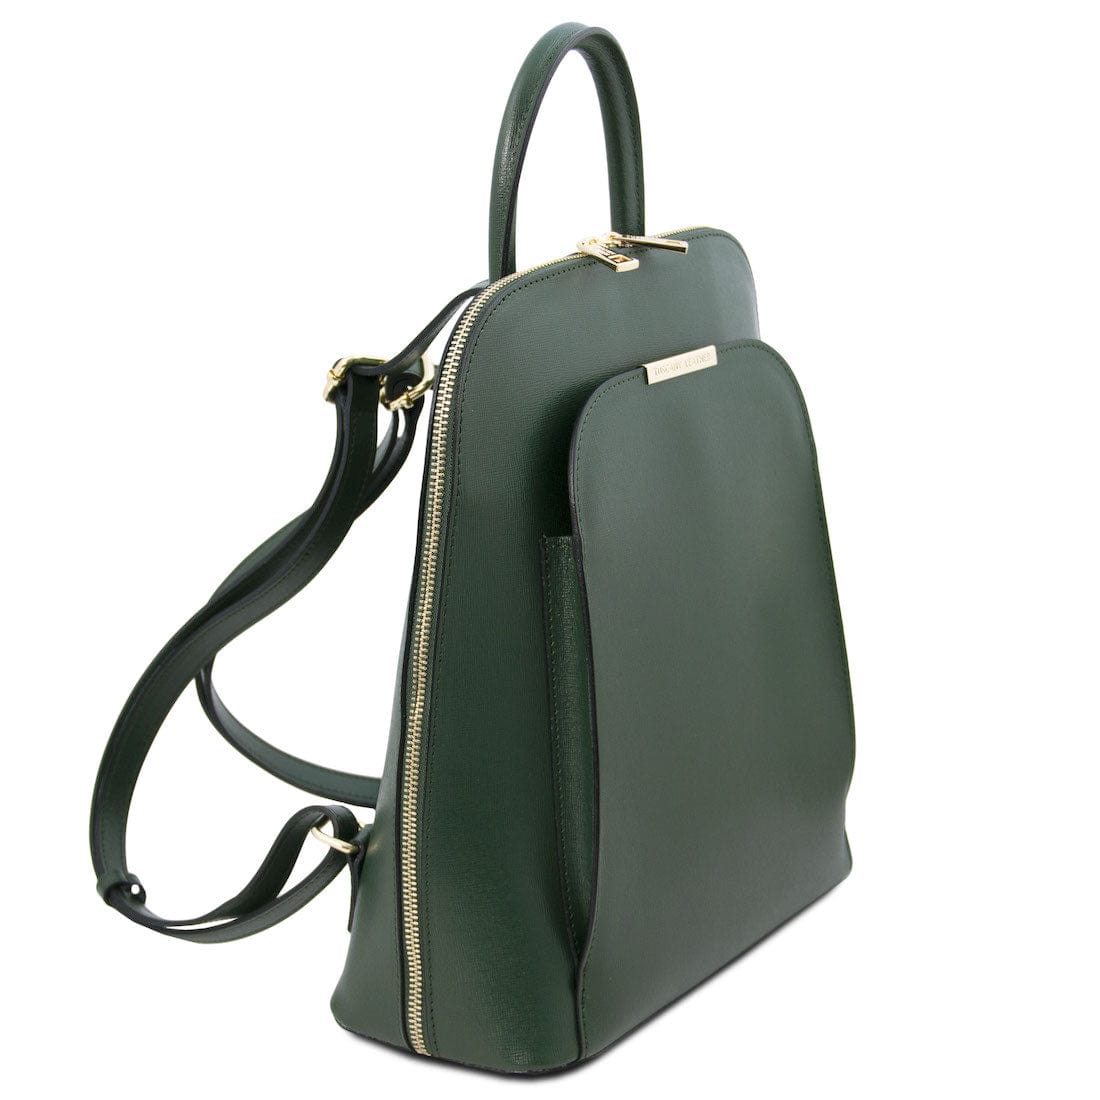 TL Bag - Saffiano leather backpack for women | TL141631 - Premium Leather backpacks for women - Just €115.90! Shop now at San Rocco Italia